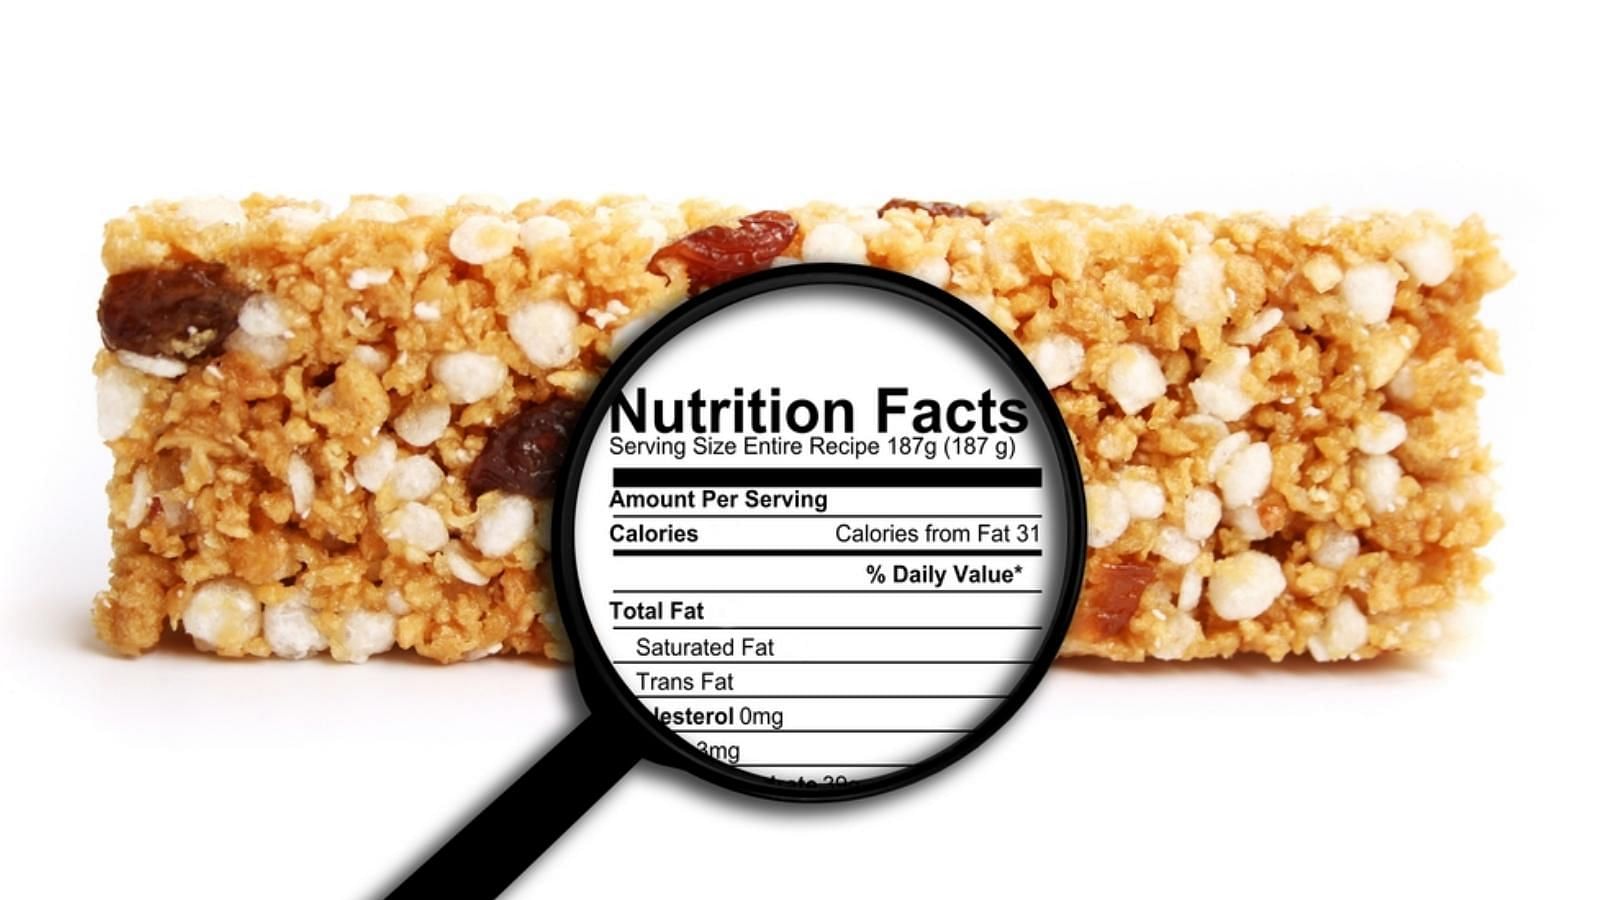  Researchers found that labelling reduced consumers’ intake of calories by 6.6 per cent.